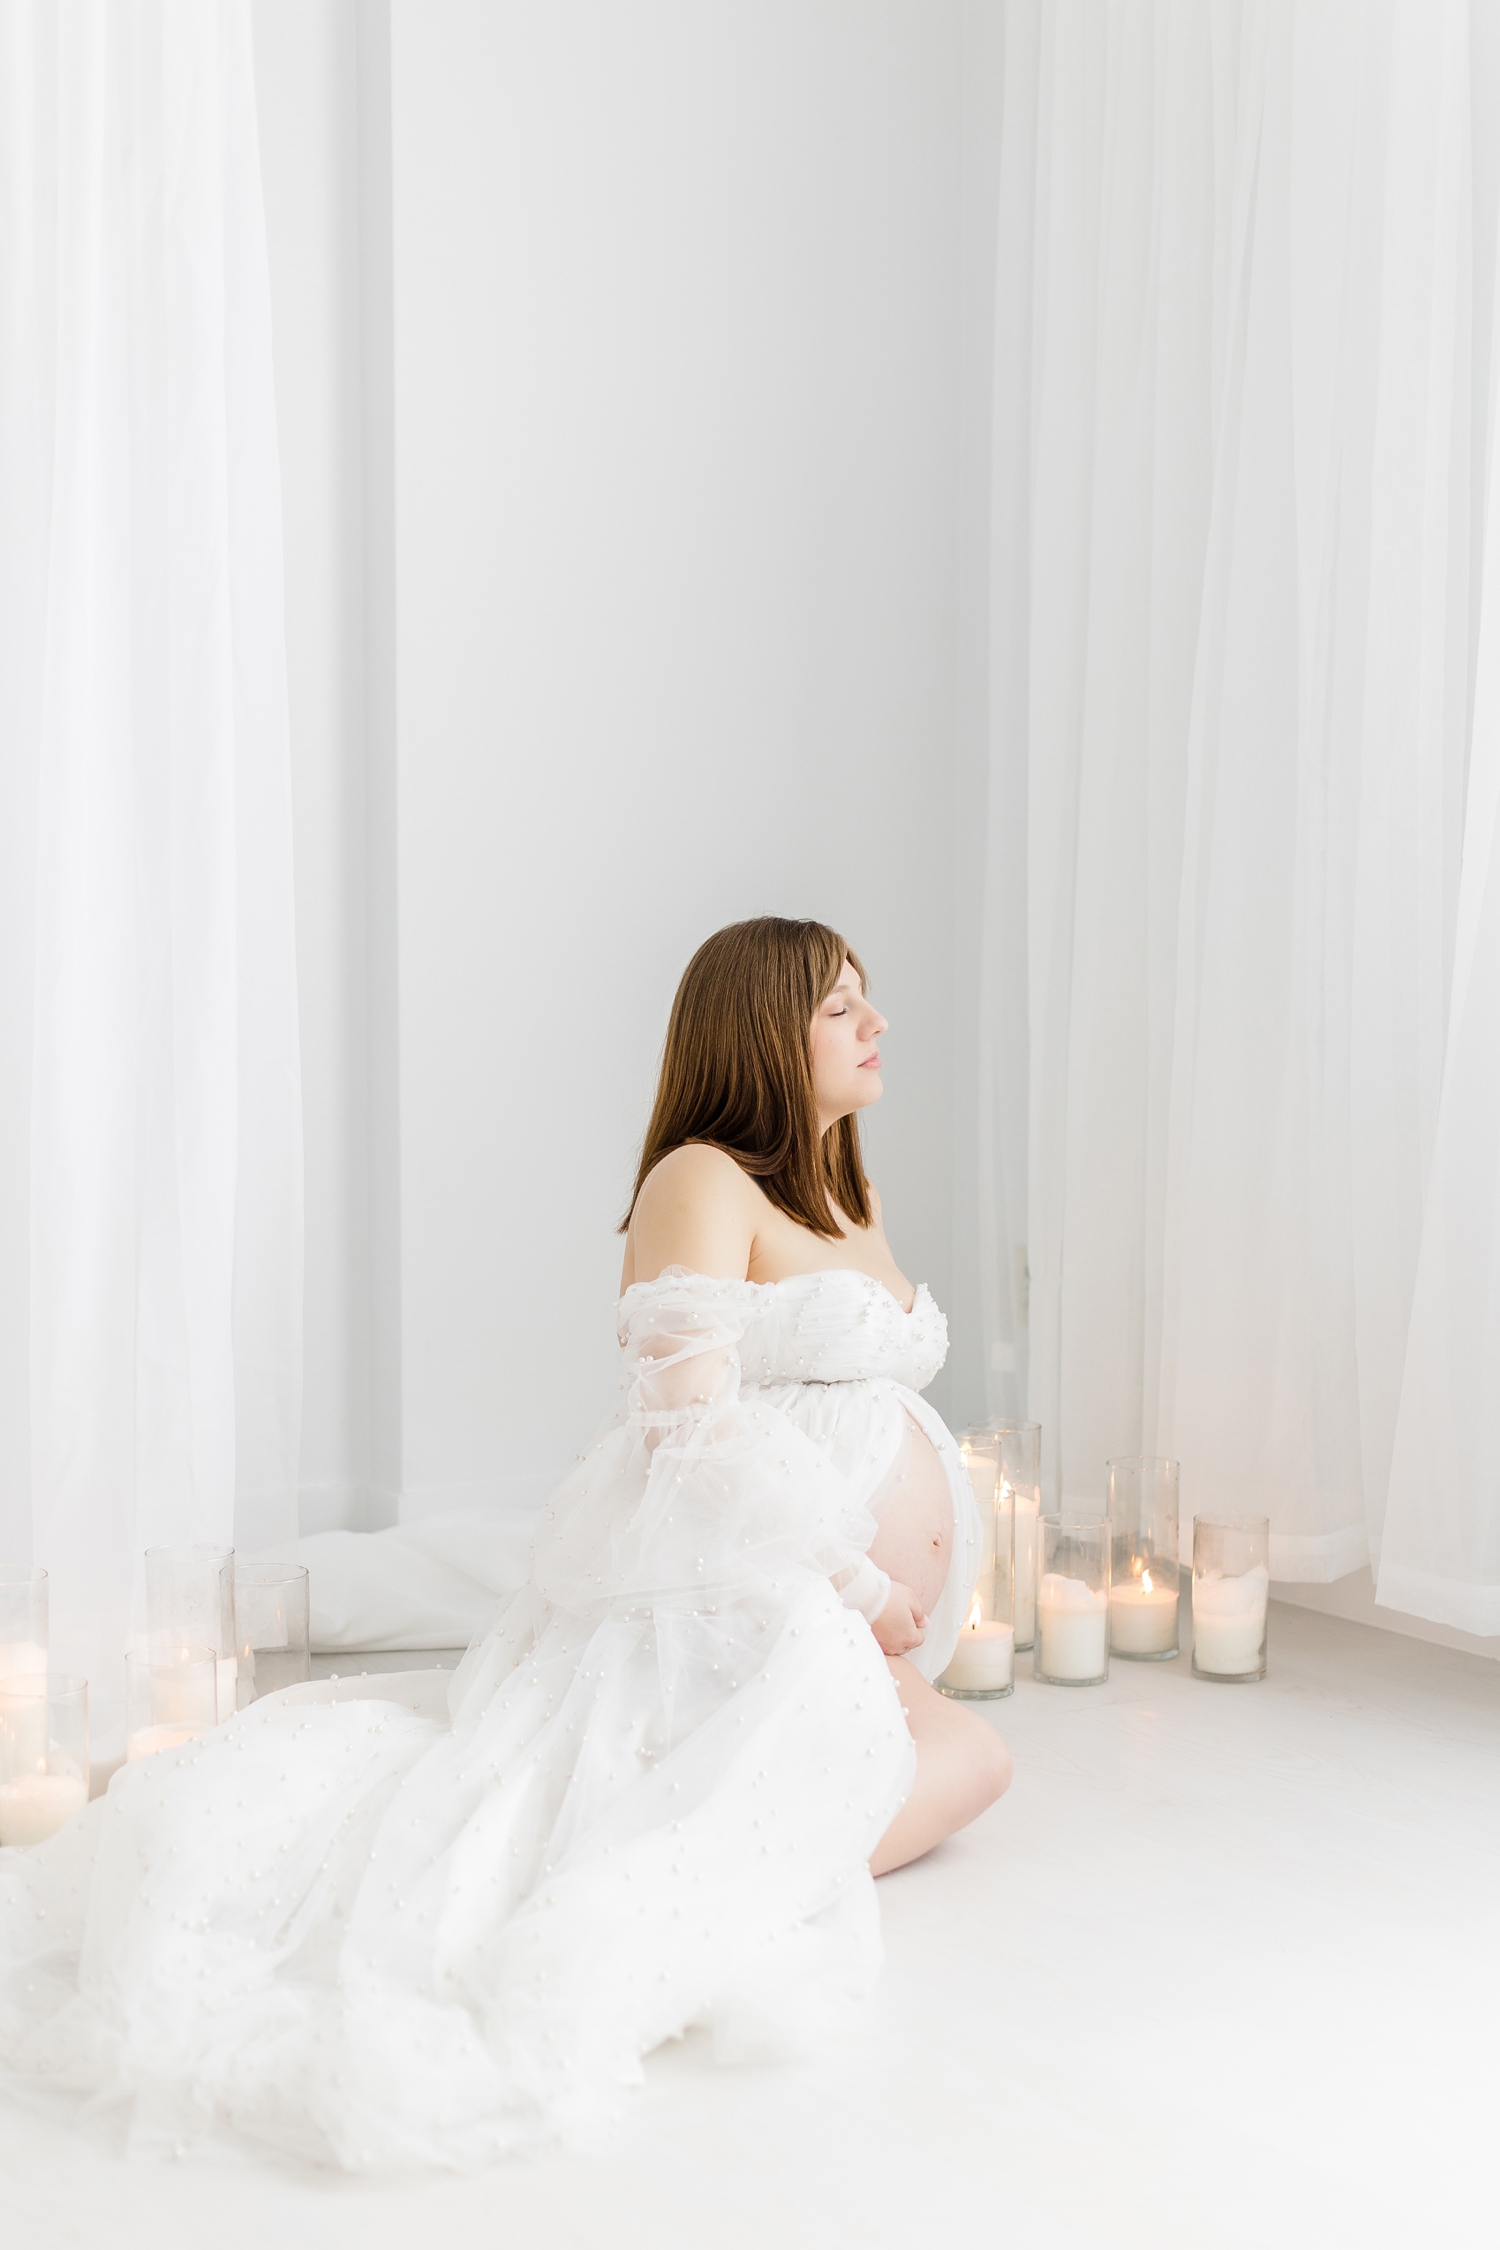 Madeline sits while gently holding her baby belly, wearing a white tulle maternity gown covered in pearls and surrounded by white draping clothes and candlelight | CB Studio Photography